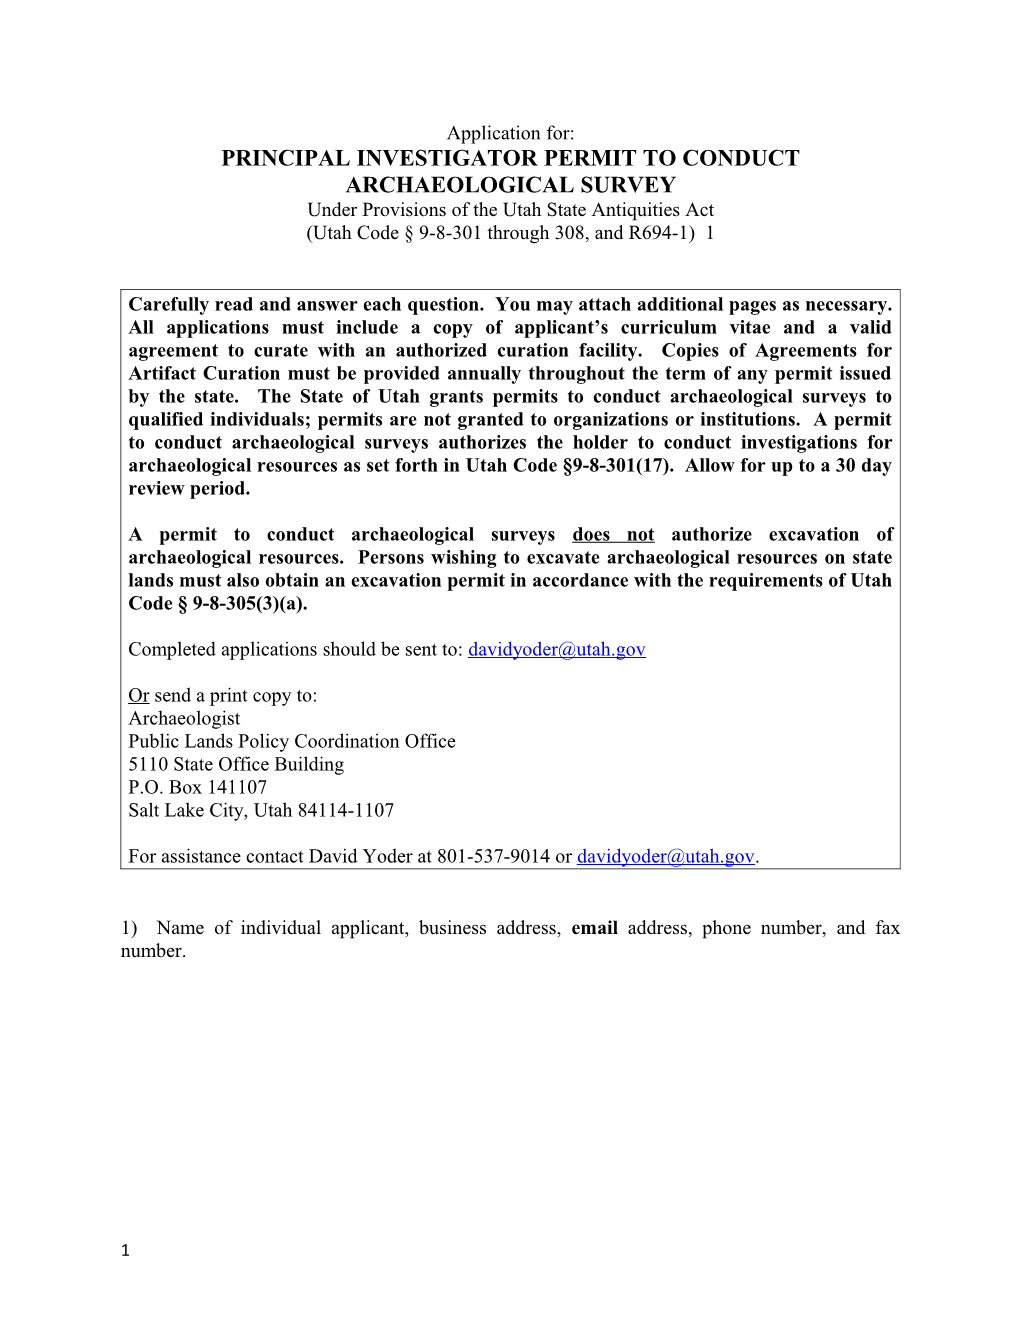 Principal Investigator Permit to Conduct Archaeological Survey